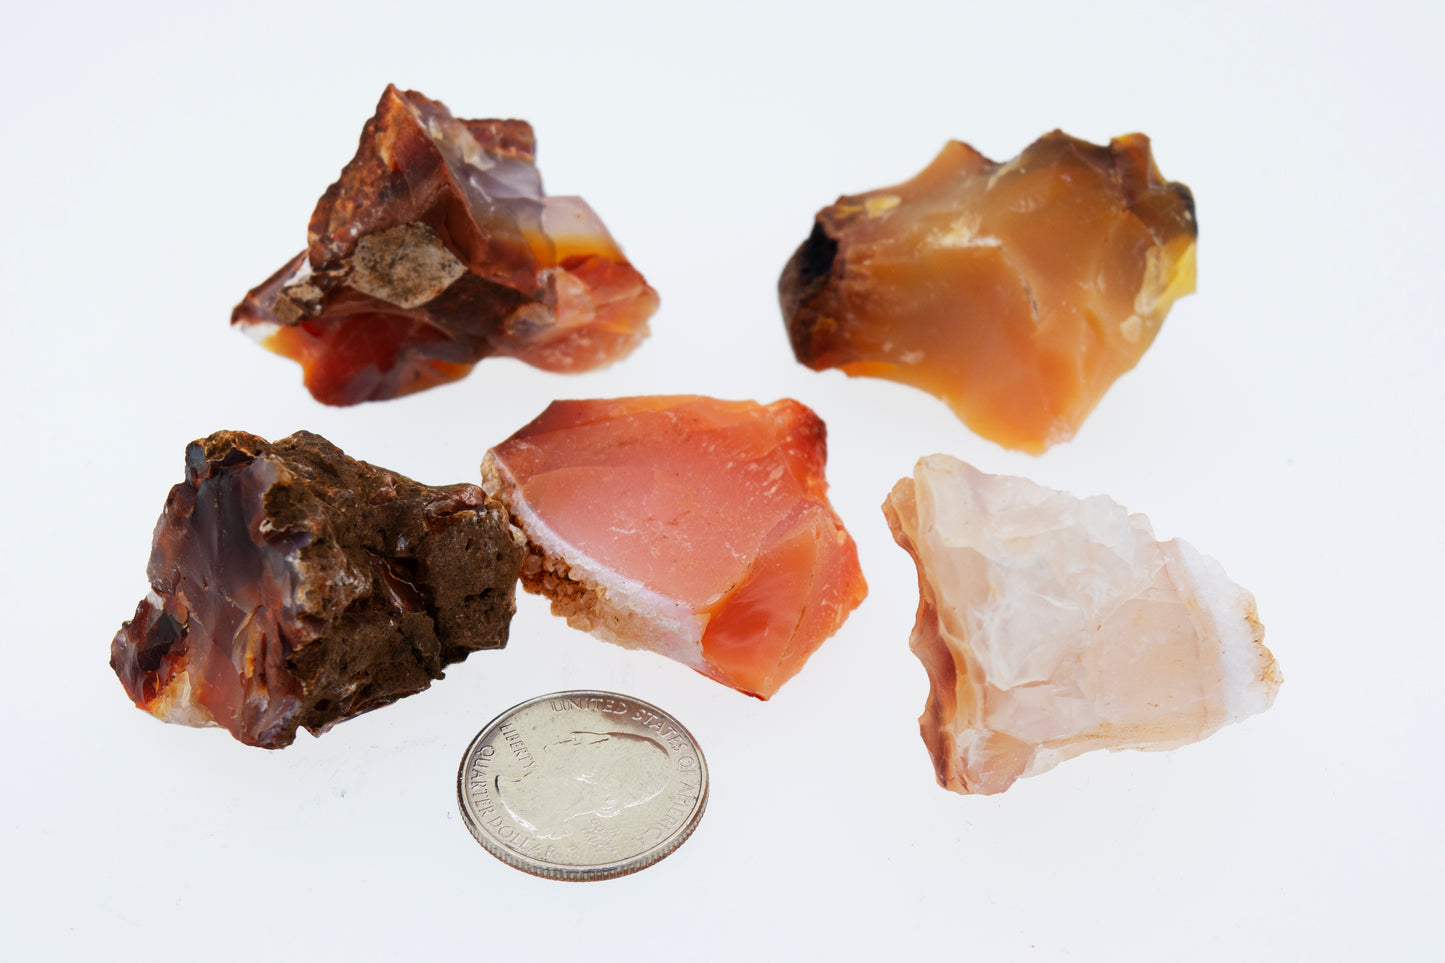 A group of Raw Carnelian Crystals next to a quarter.